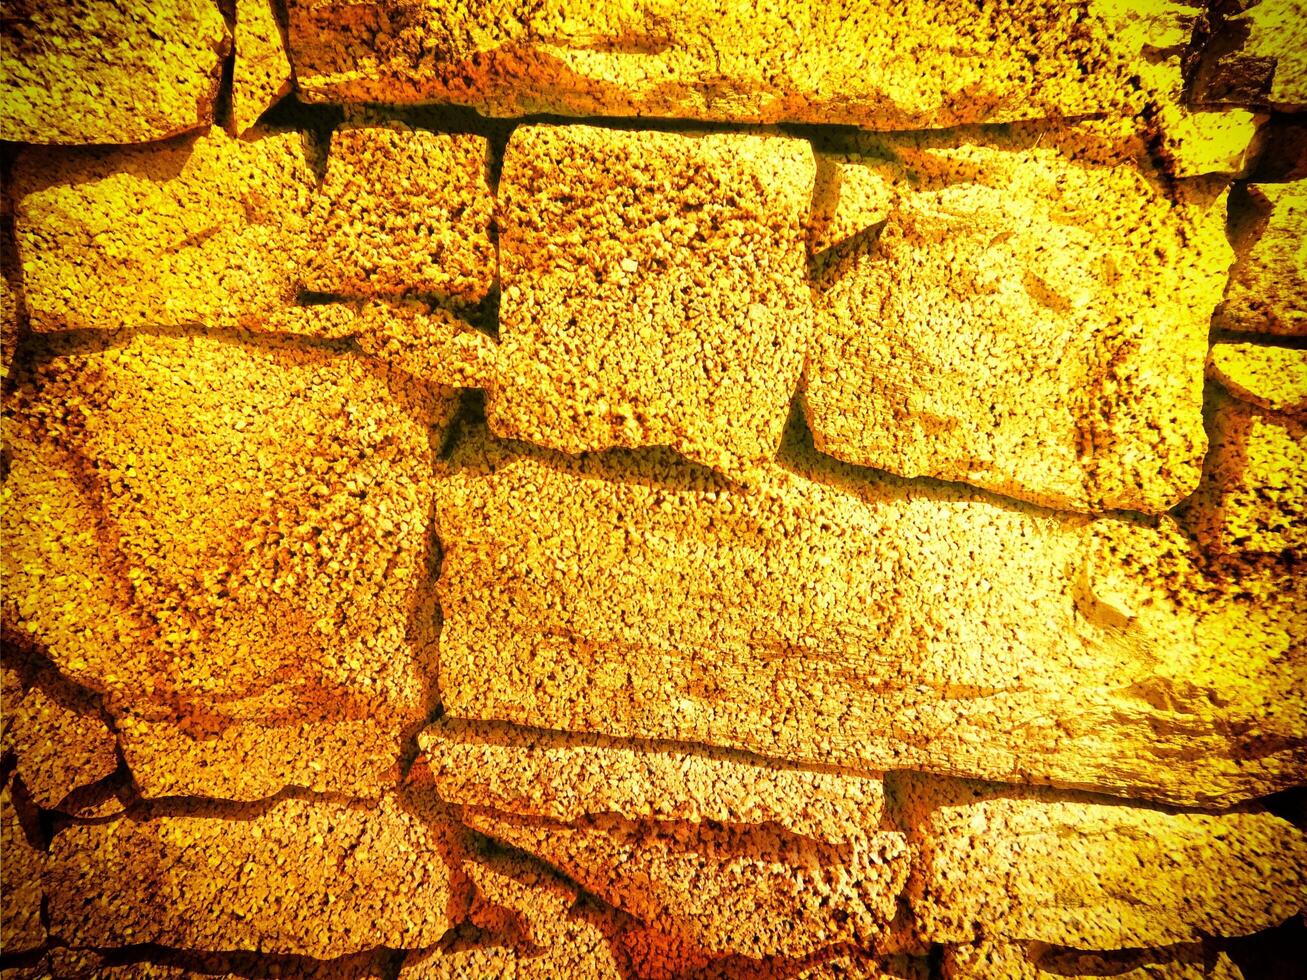 Texture Of Yellow Stone In The Garden photo